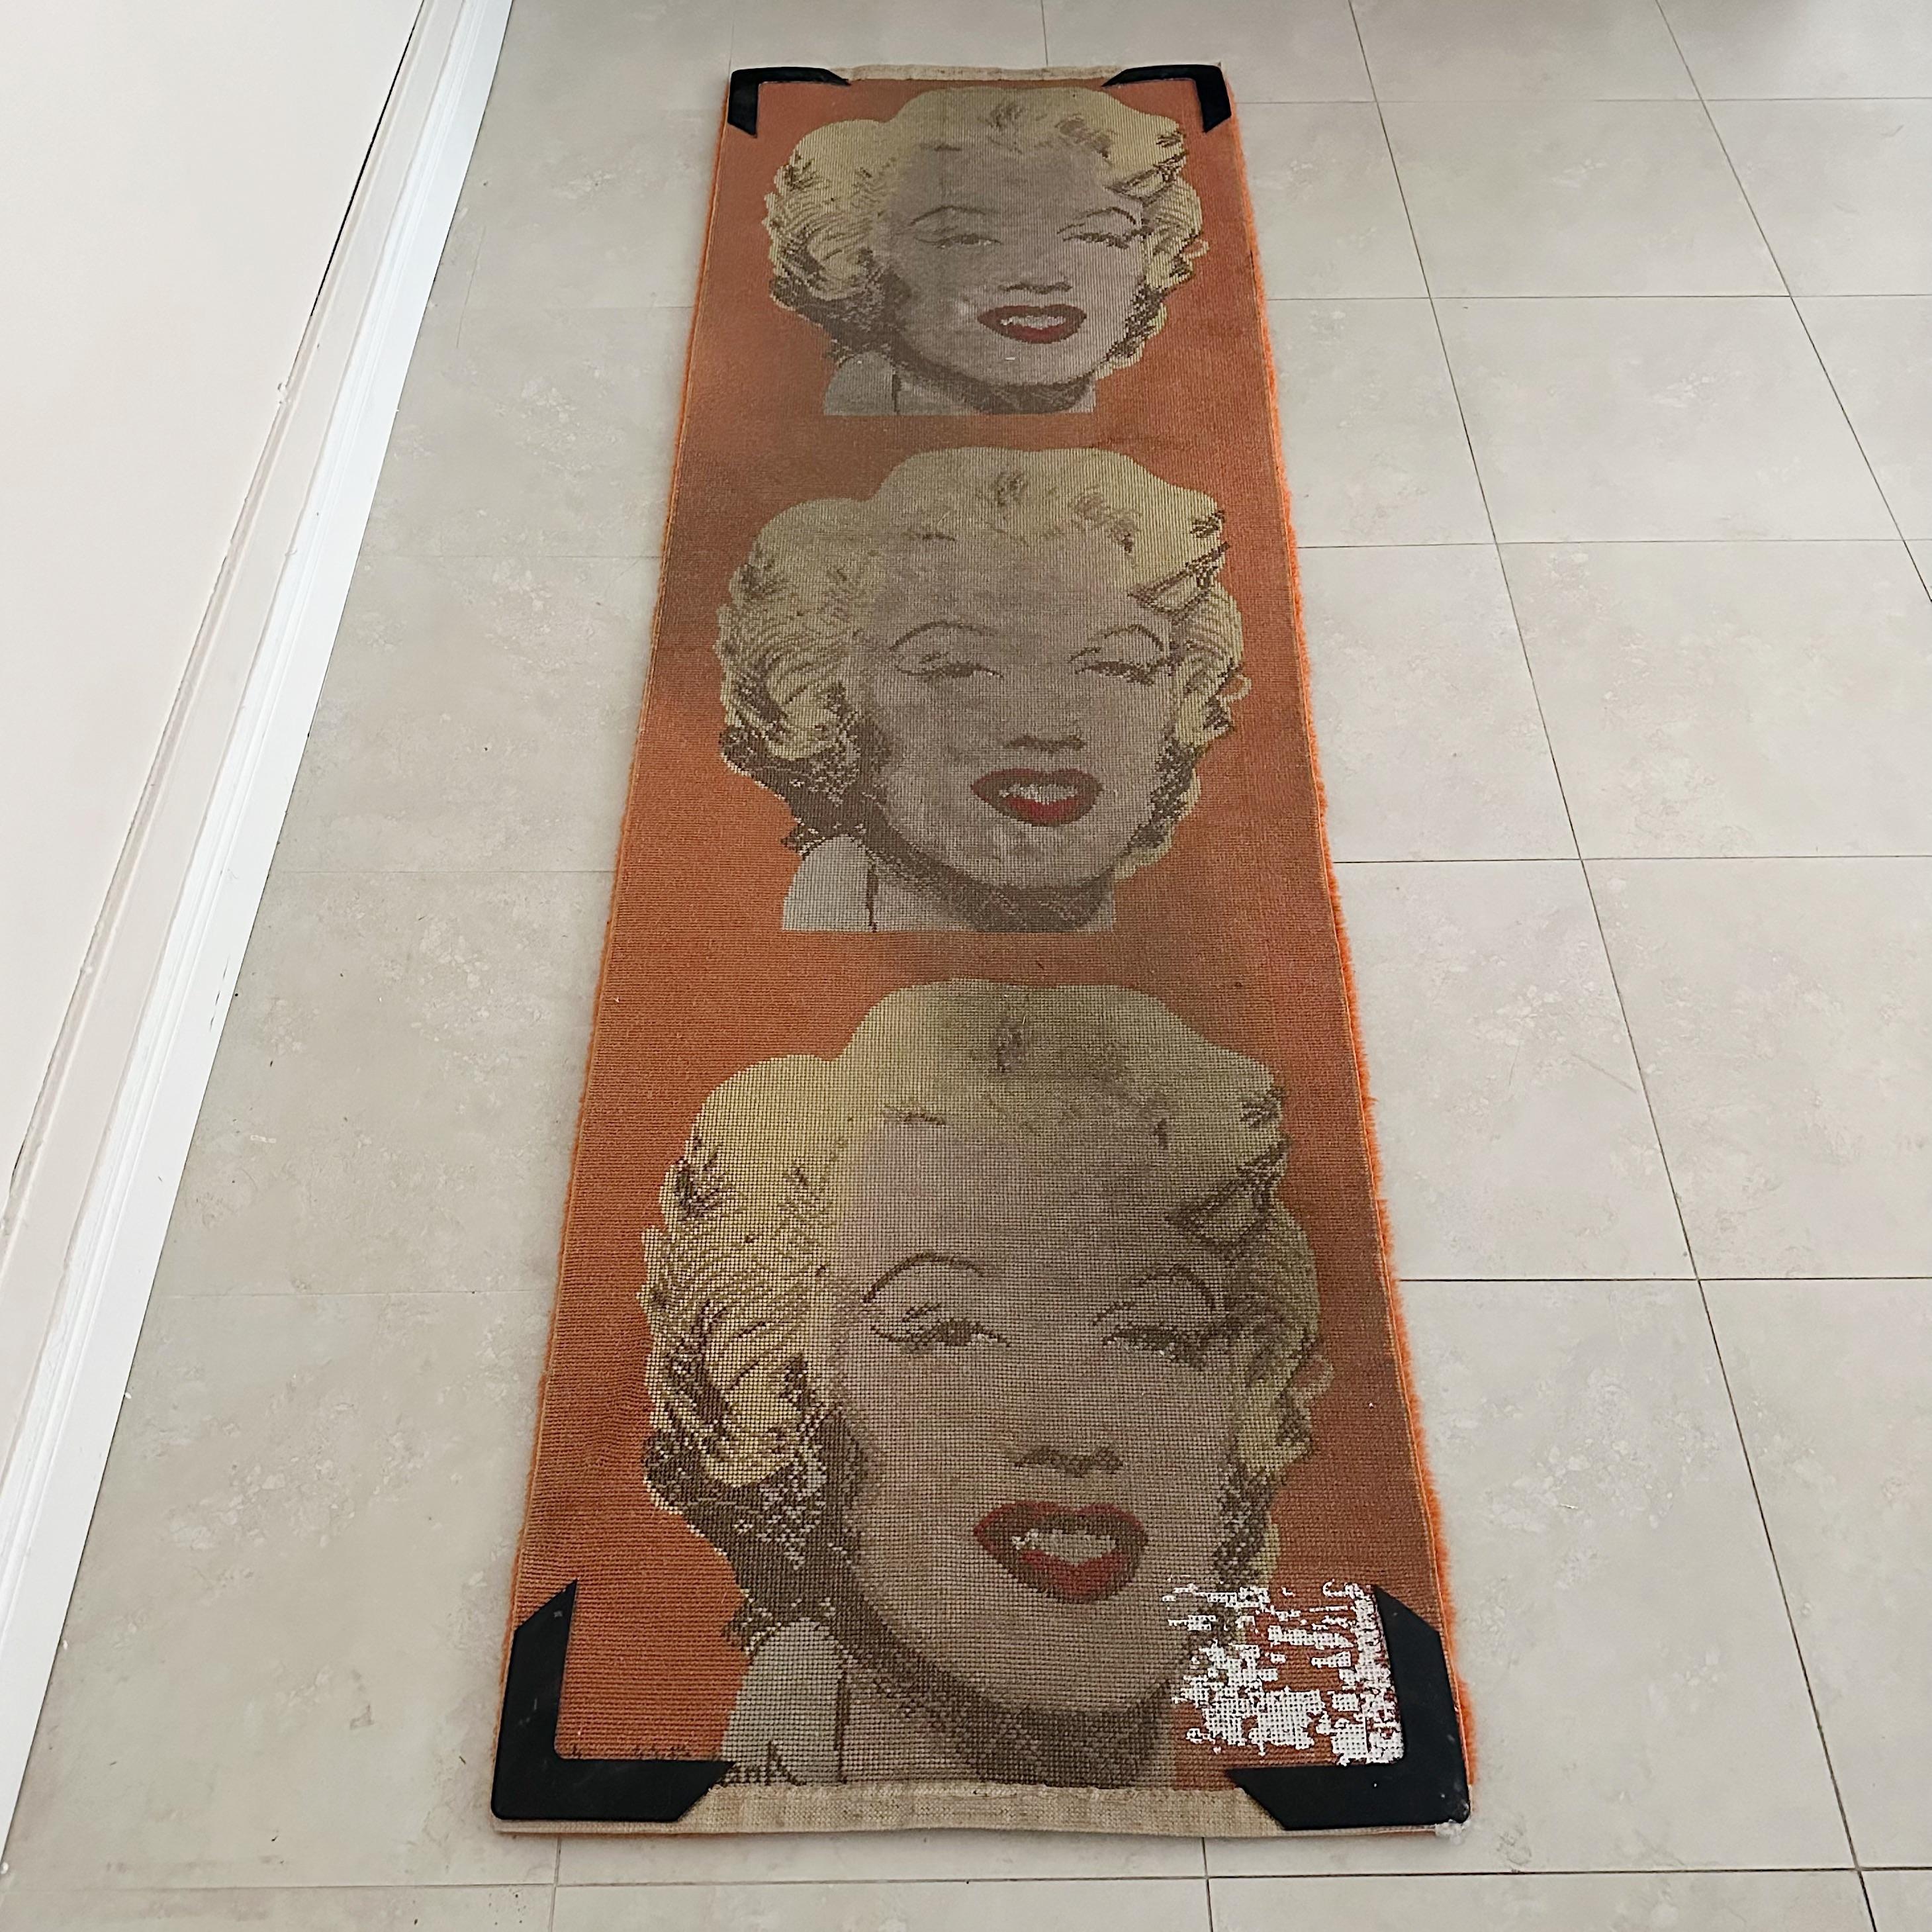 Hand-Crafted Large Andy Warhol Age Carpet Rug Signed